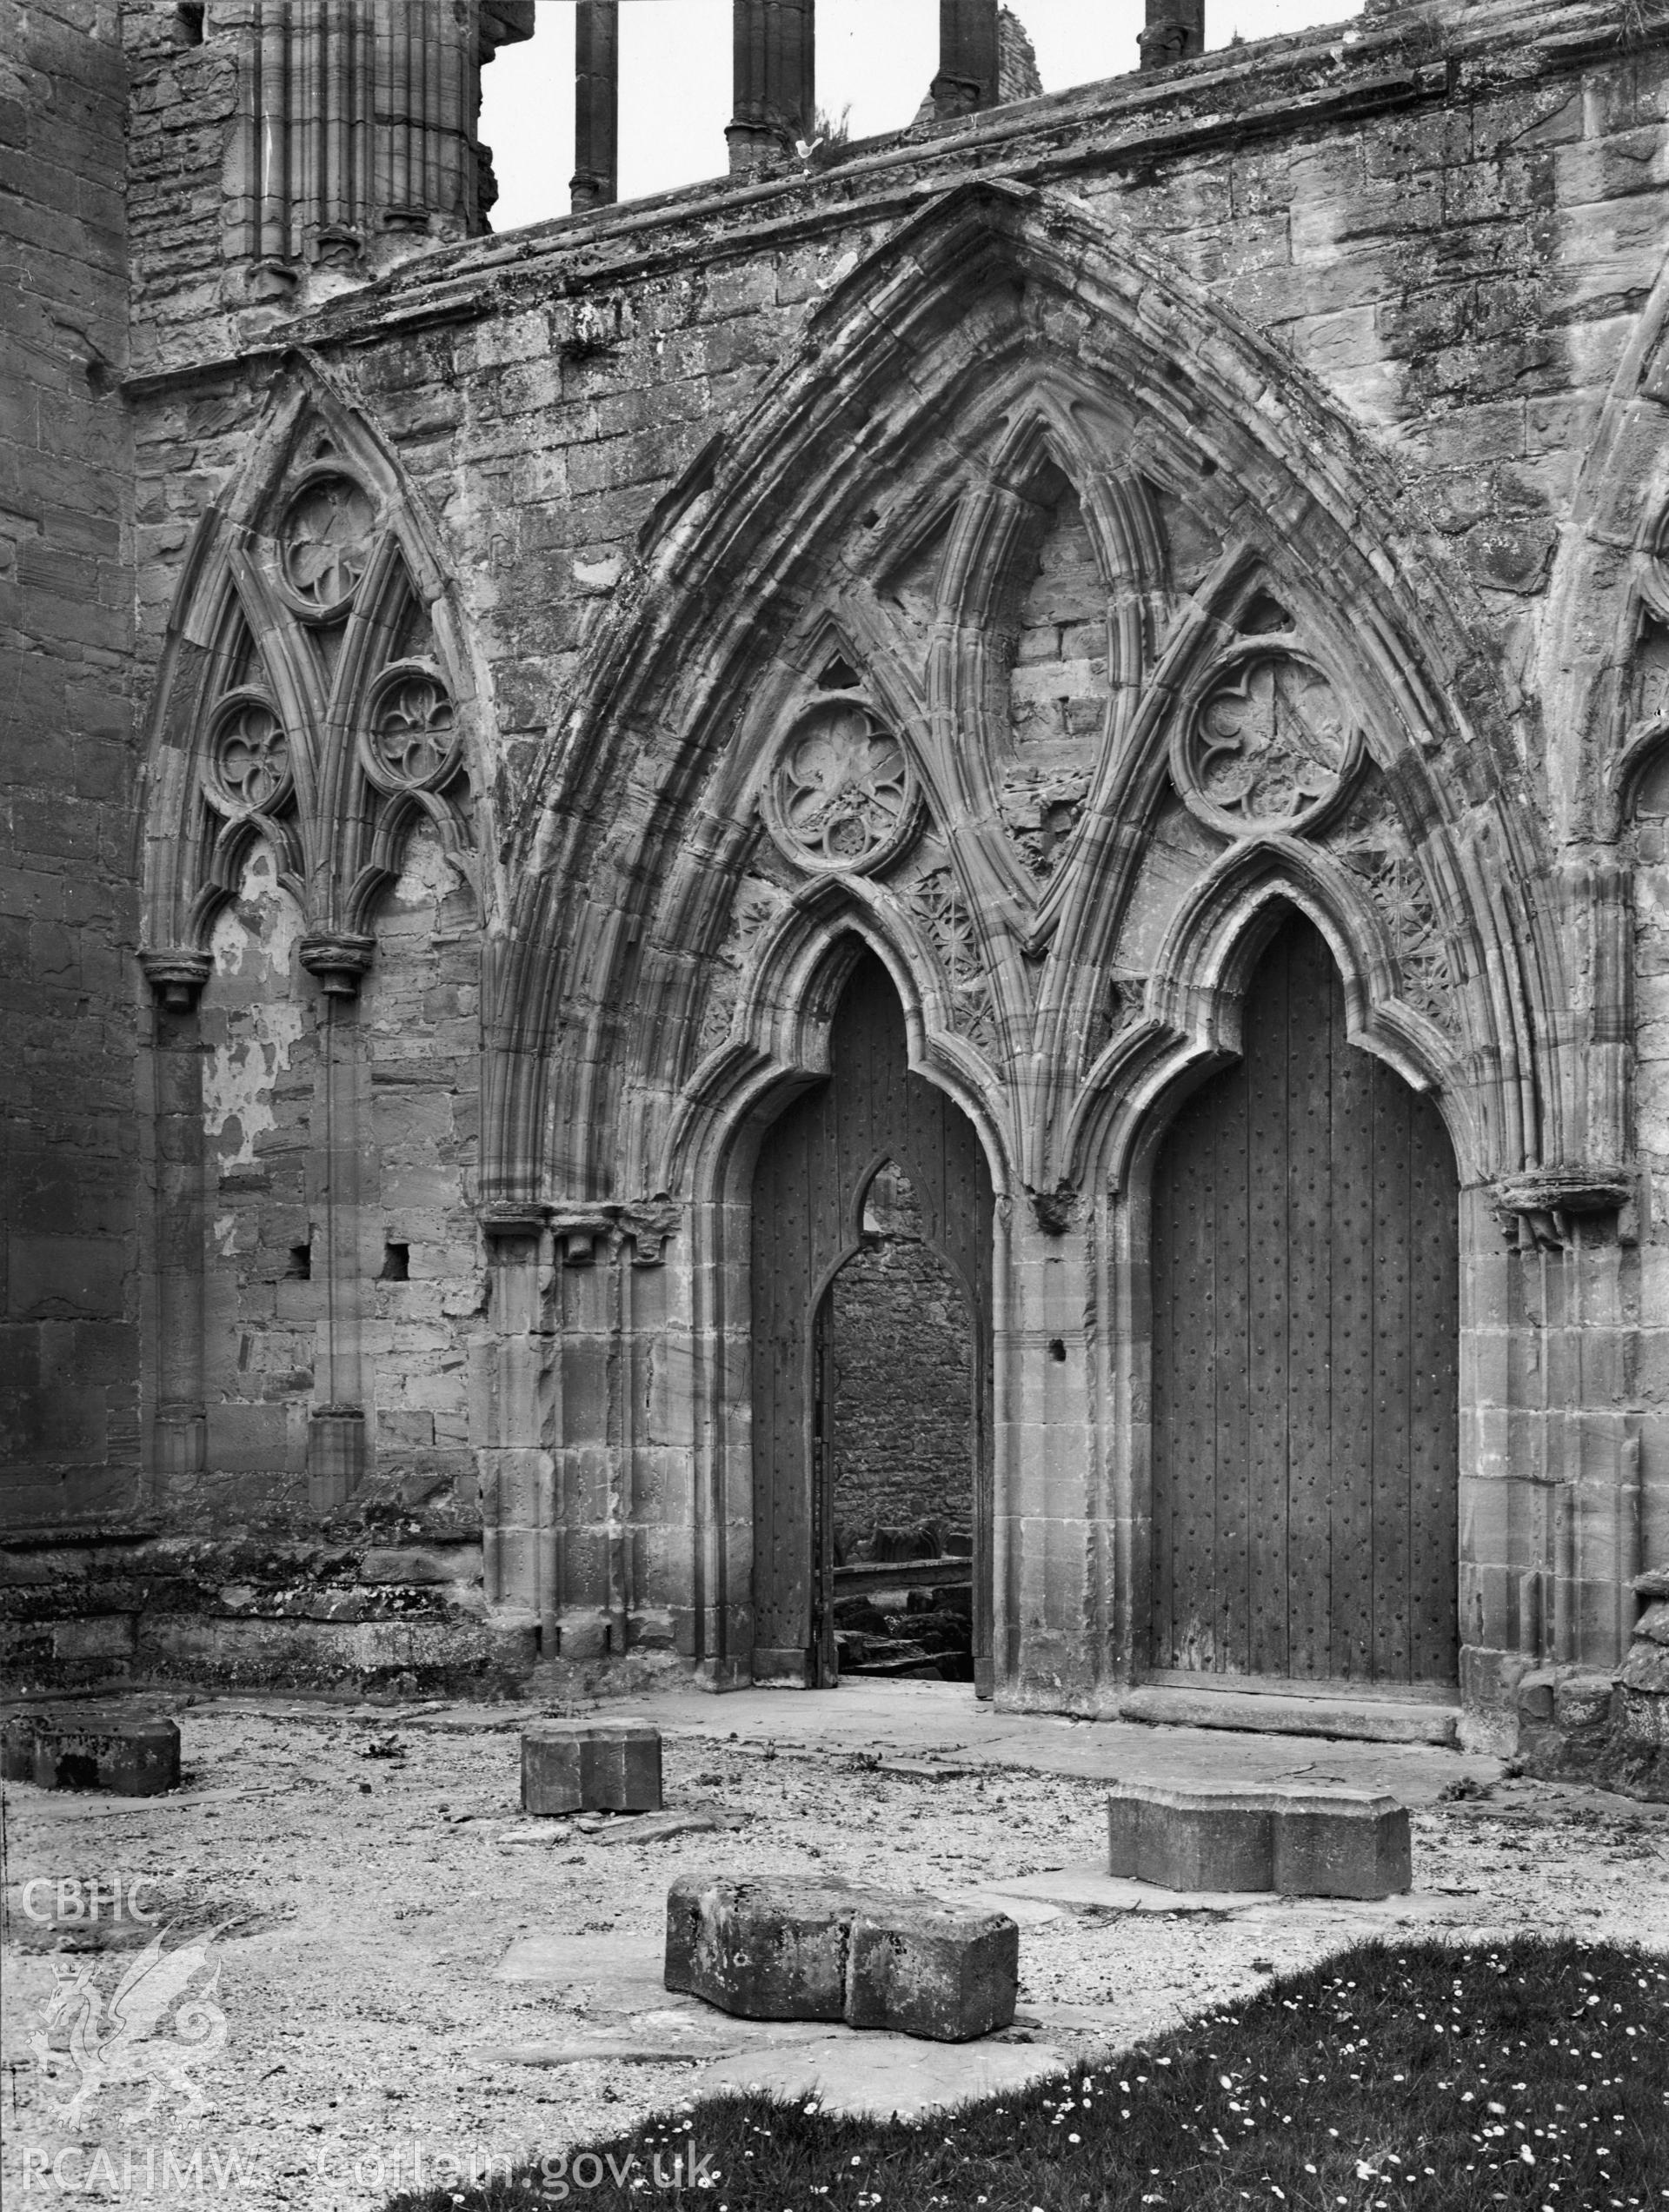 Black and white photo showing view of west doorway of Tintern Abbey taken circa 1905.